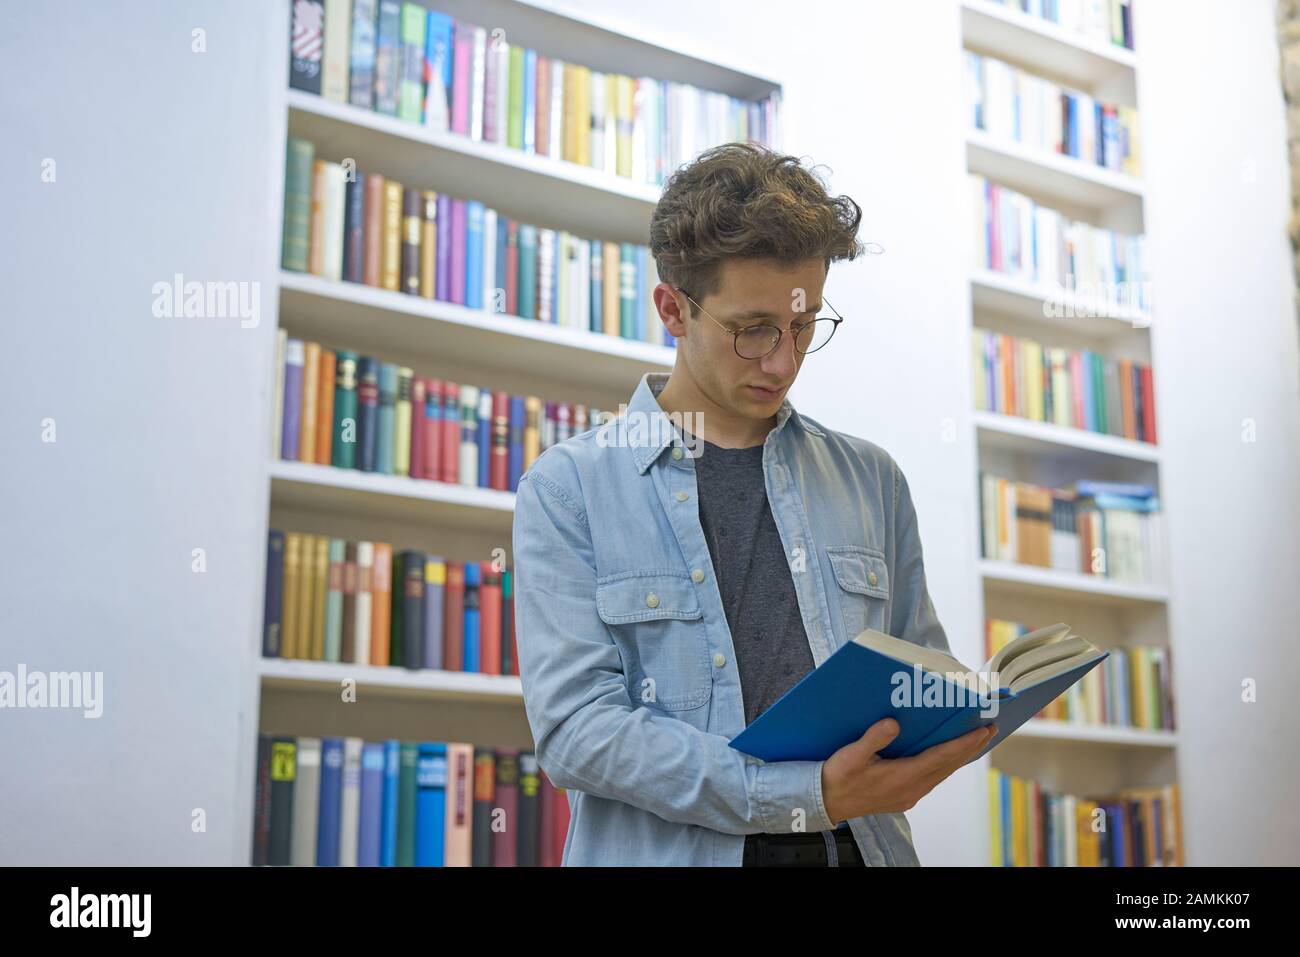 Young handsome man reading a book in a library with big bookshelves in the background. Stock Photo